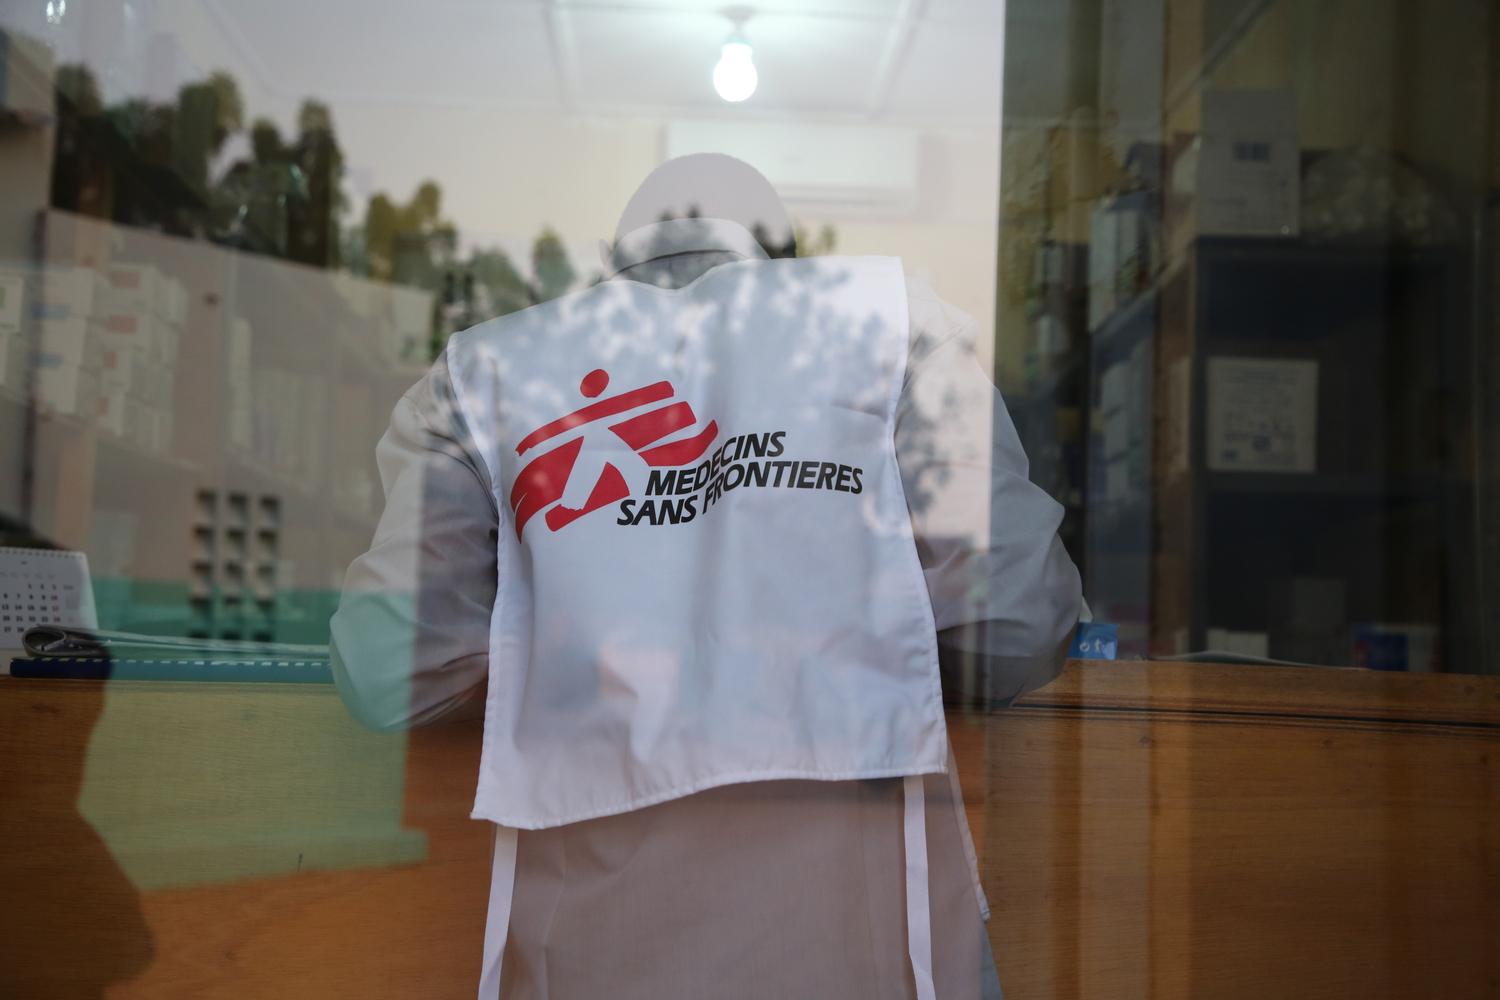 MSF is treating people injured in attacks in central Mali